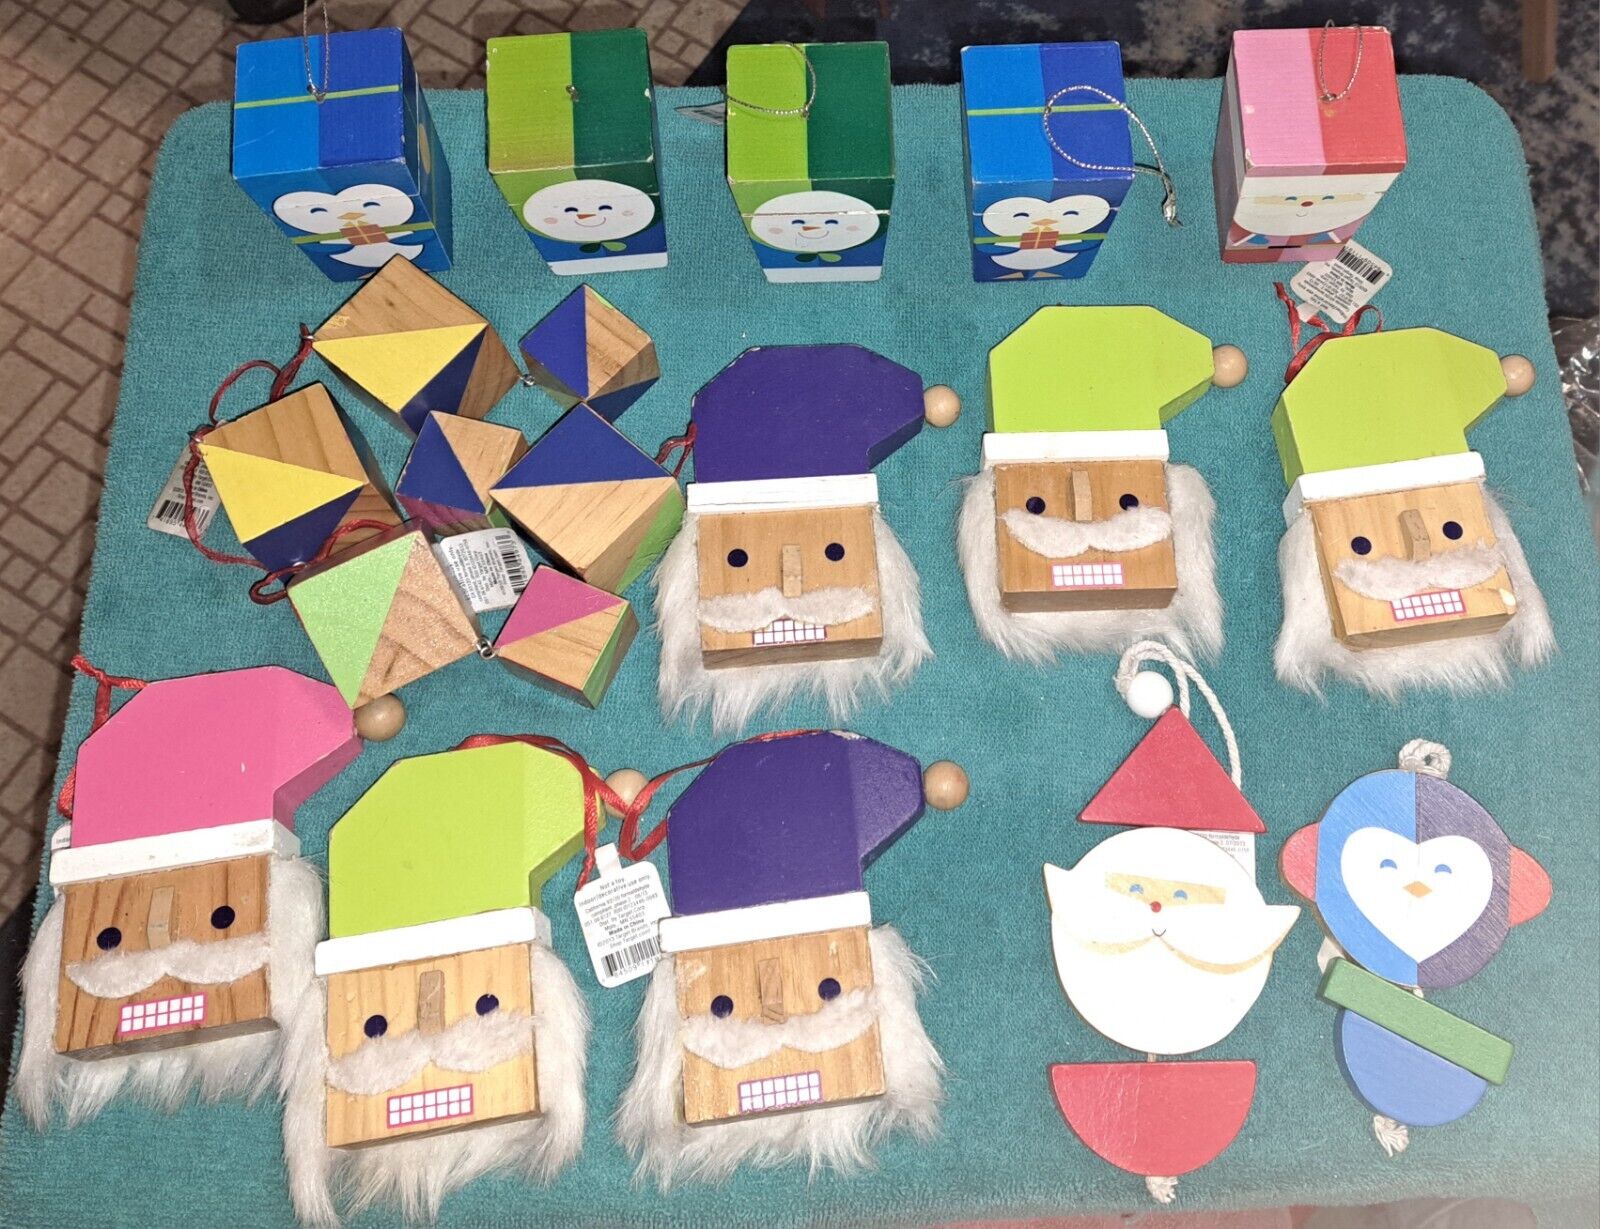 Wooden Christmas 2013 Target Brand Ornaments Lot Of 16 Plus 1